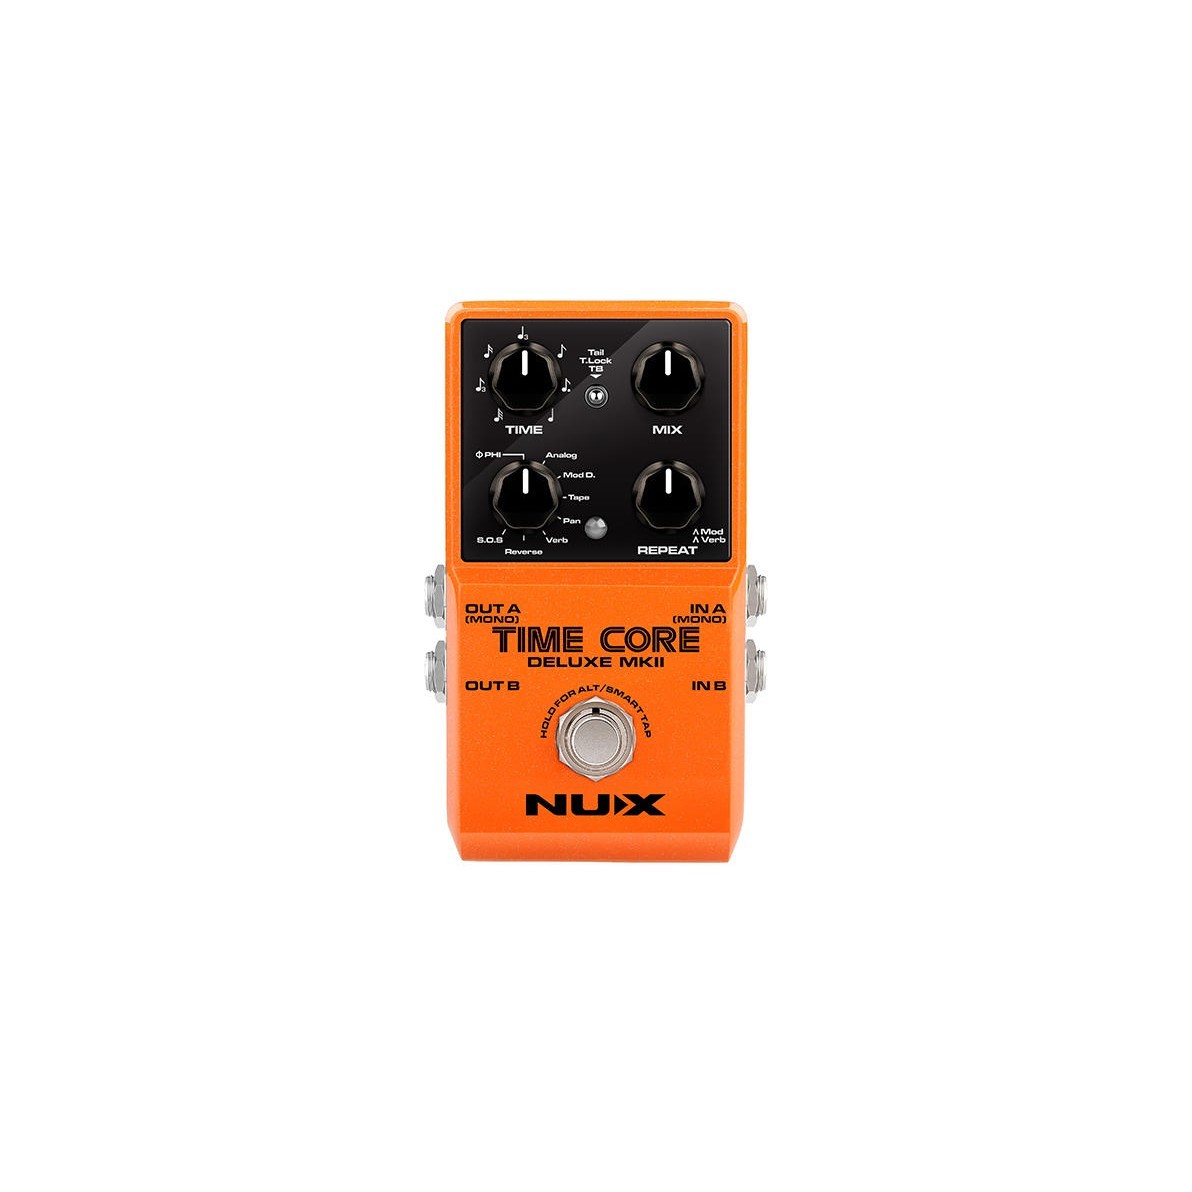 STOMPBOX NUX TIME CORE DELUXE MKII